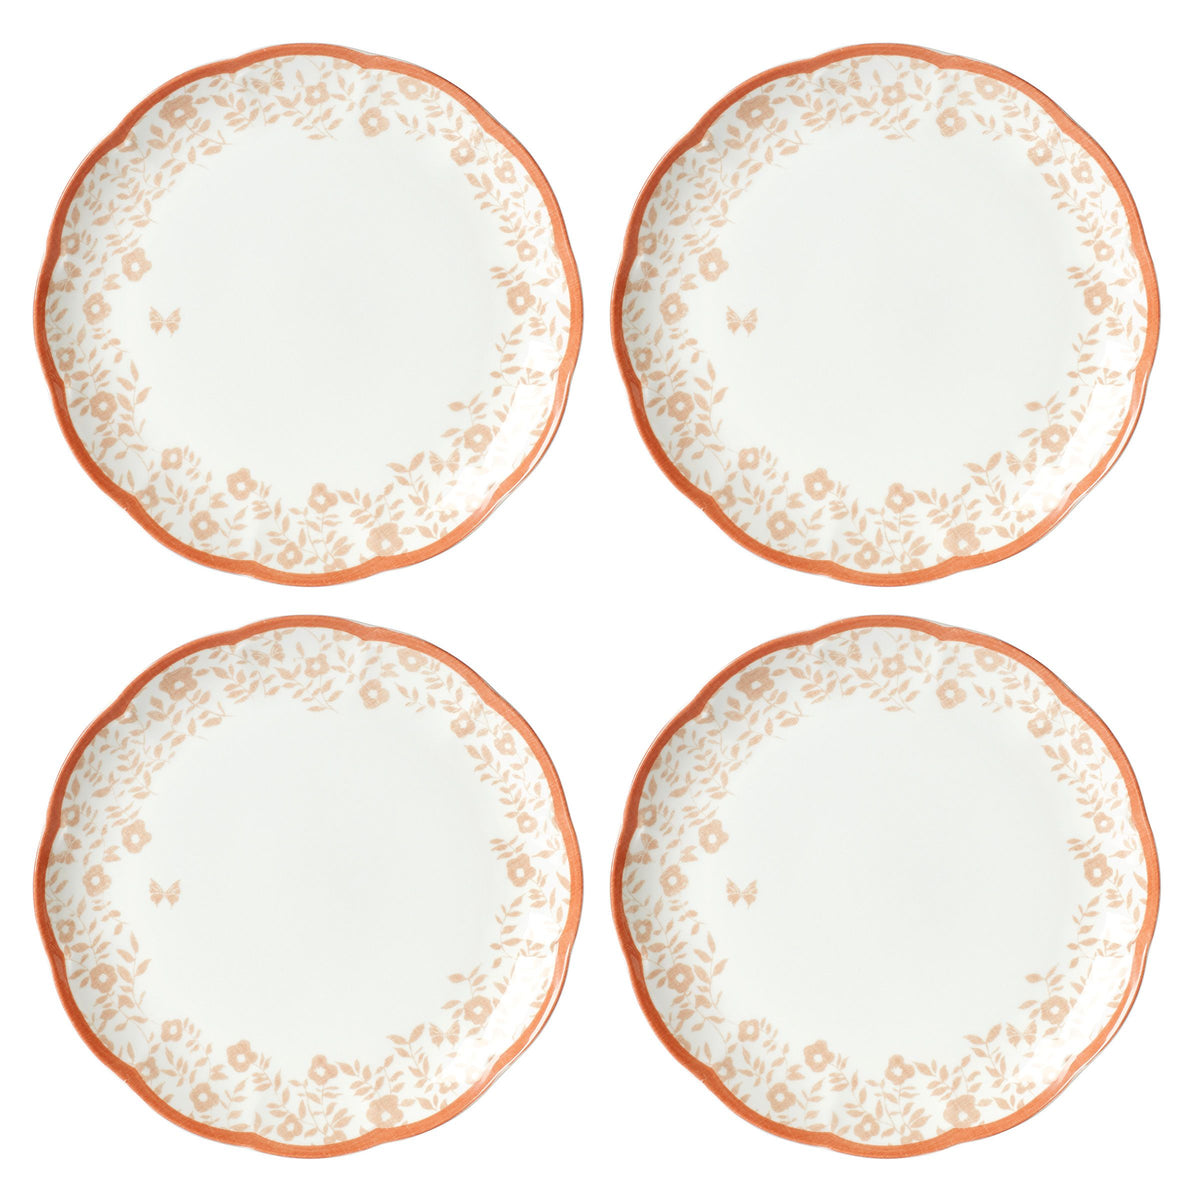 Butterfly Meadow Cottage Saffron Dinner Plates Set of 4